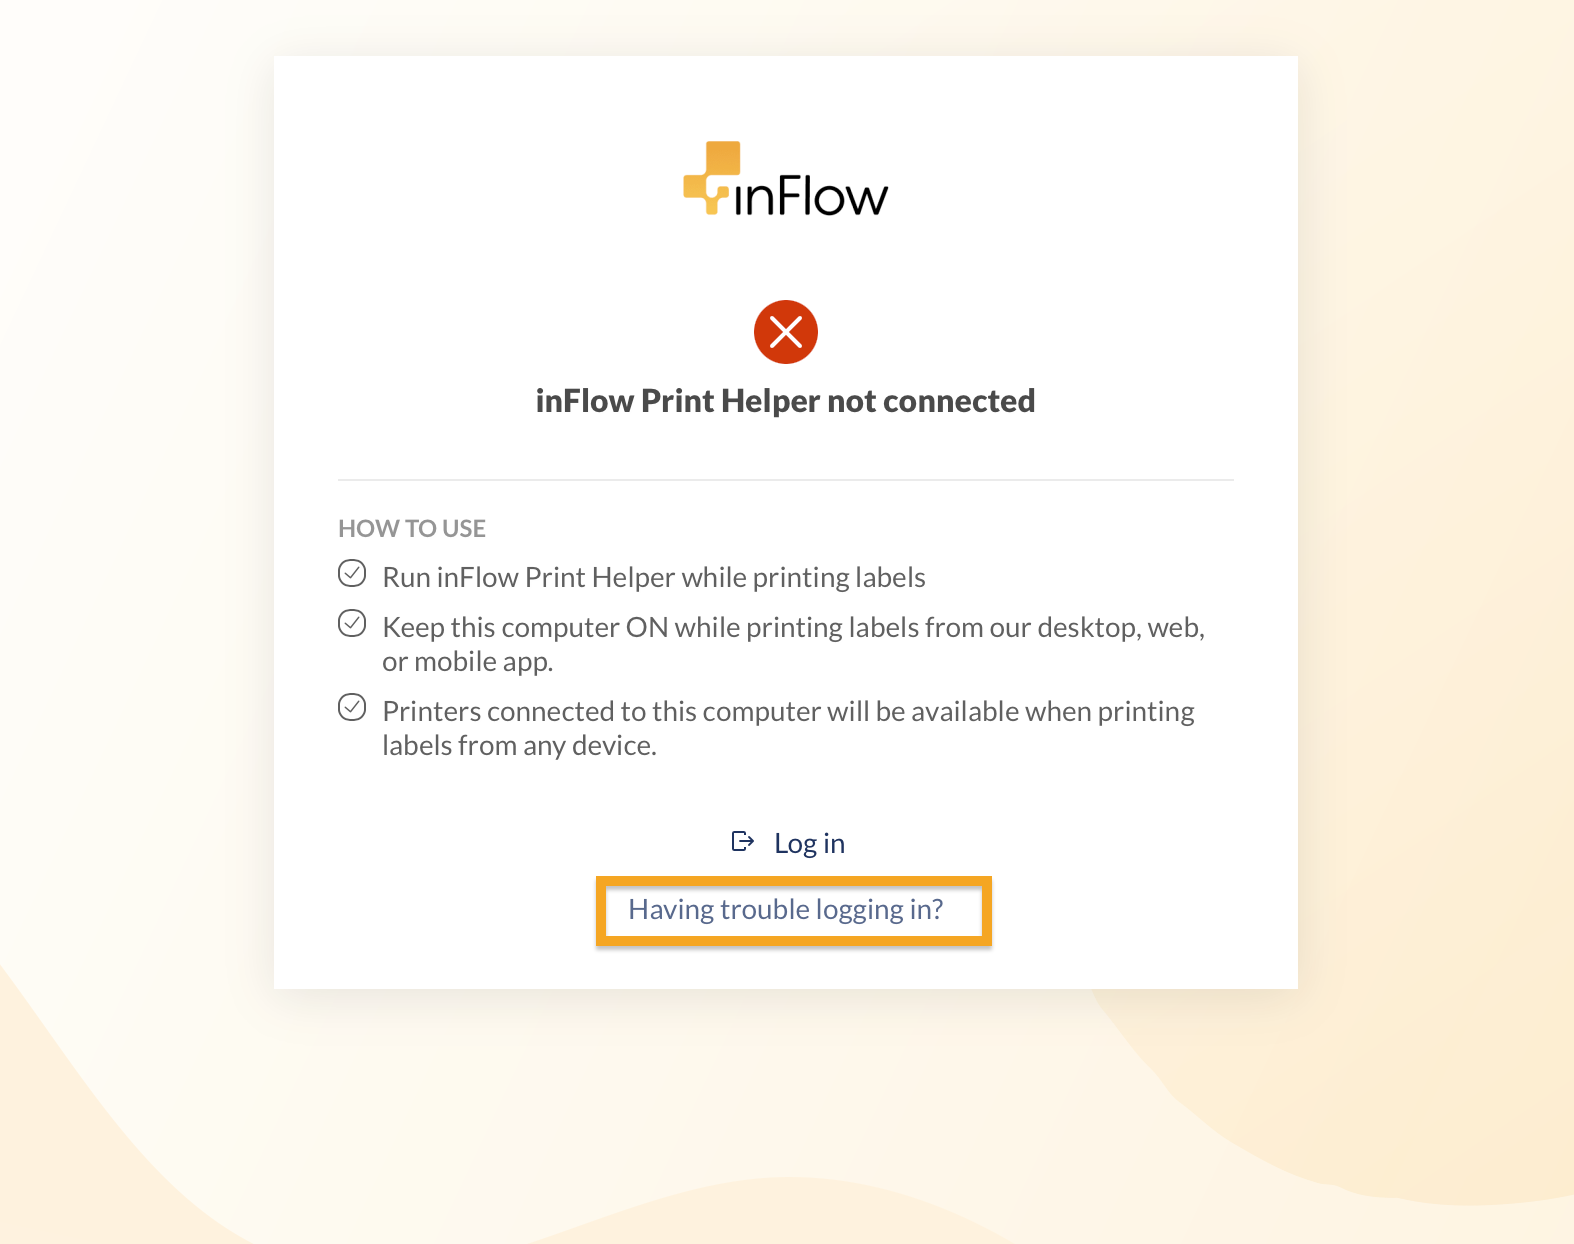 inFlow Print Helper not connected screen. Below is the "Log in", and the "Having trouble logging in?" link.